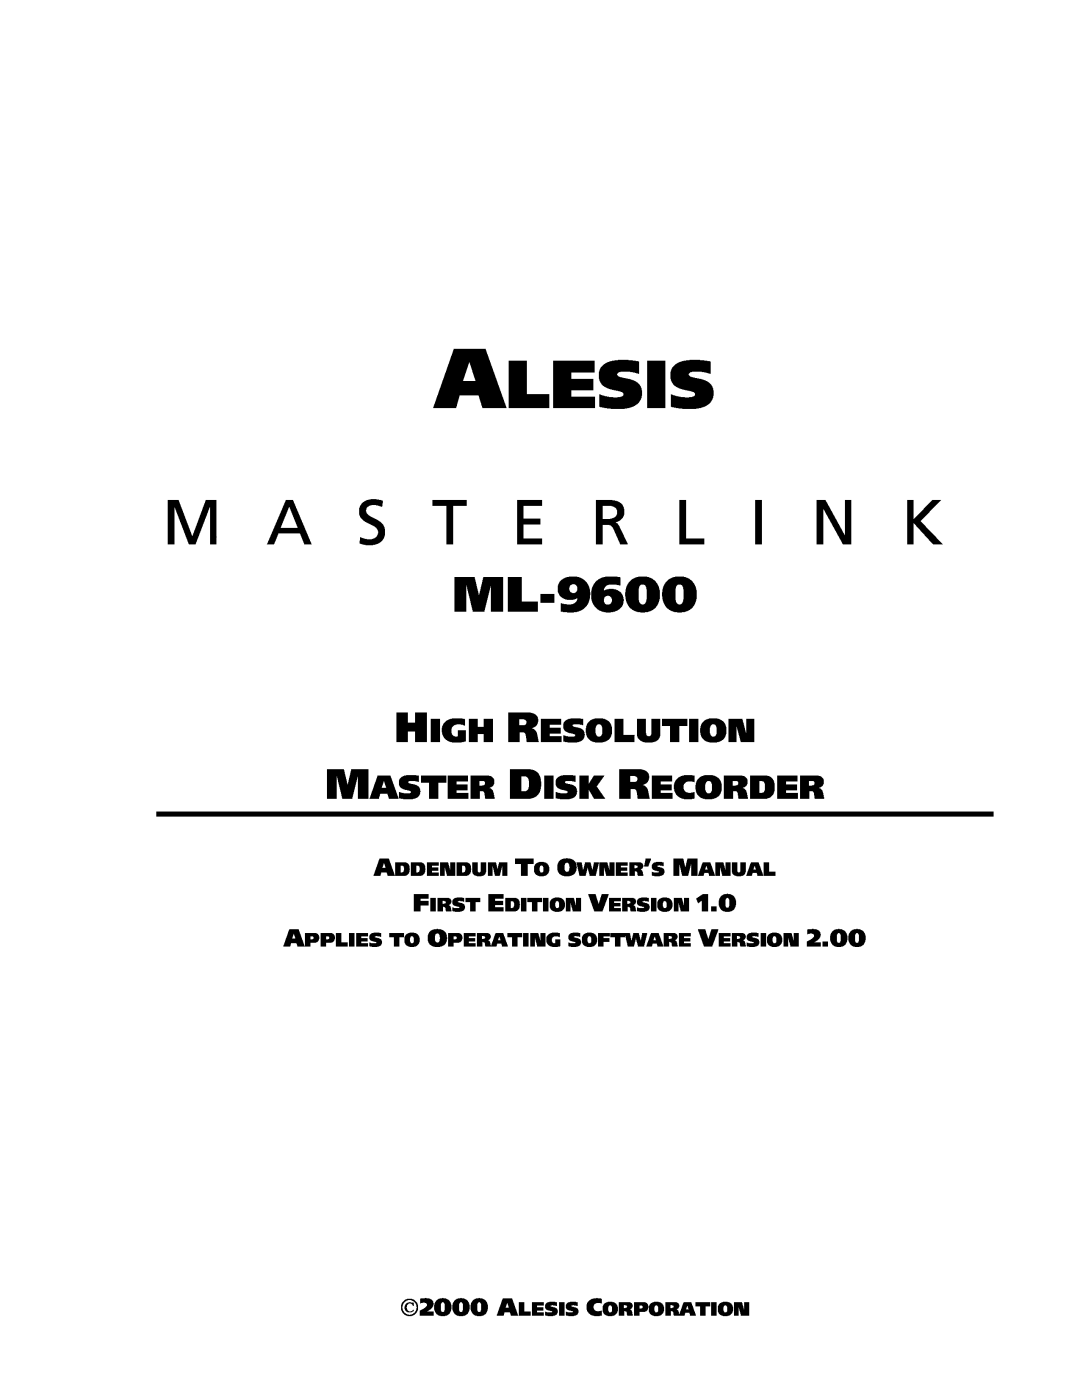 Alesis ML-9600 owner manual Applies To Operating Software Version, Alesis Corporation, M A S T E R L I N K 